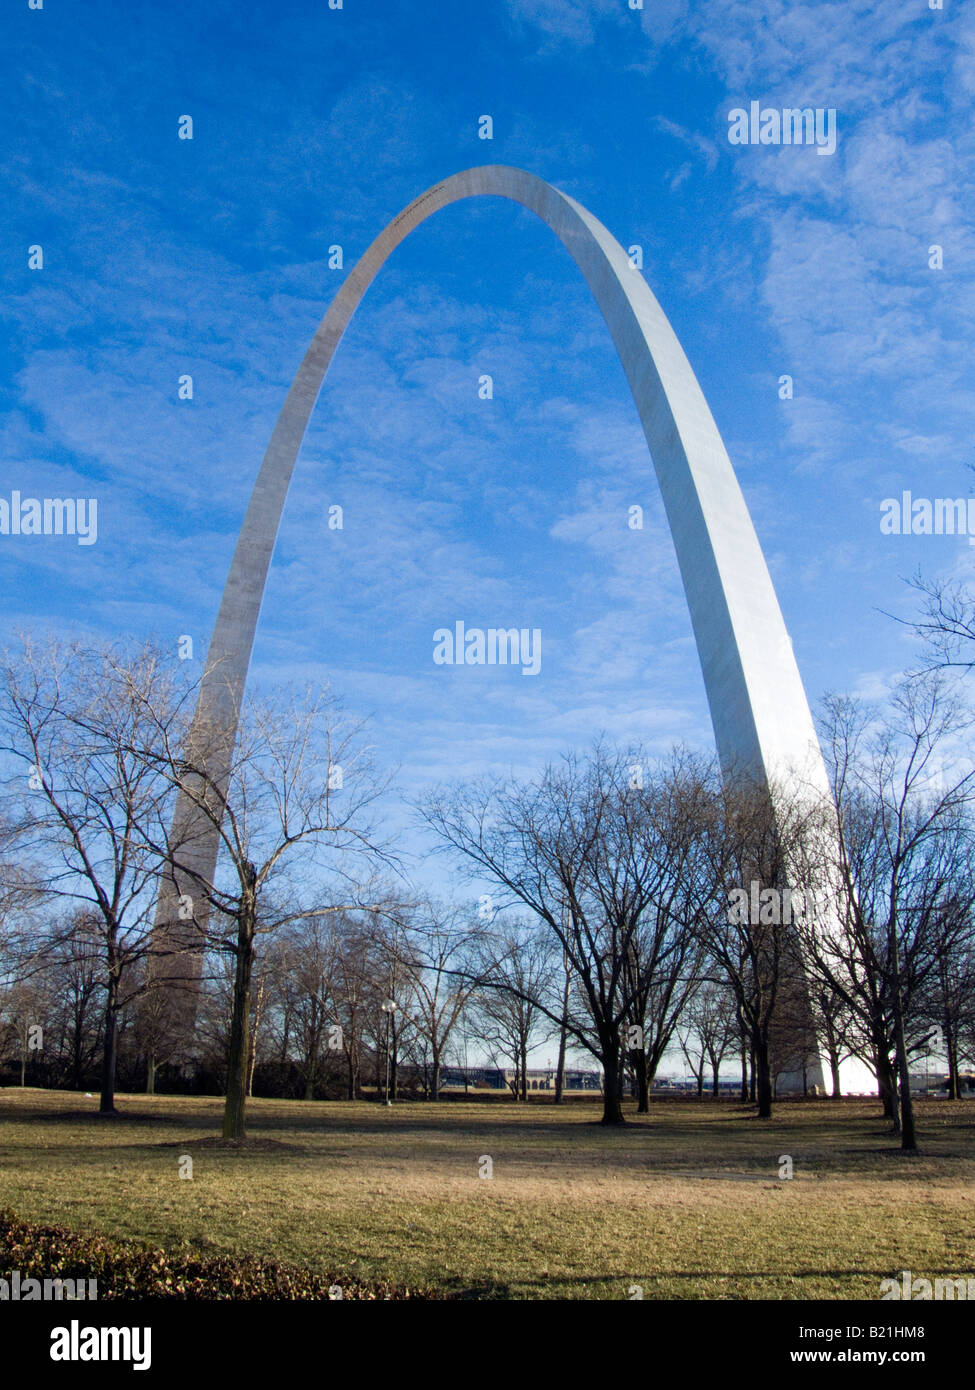 Completed in 1965, the St. Louis Arch commemorates Thomas Jefferson Stock Photo: 18475528 - Alamy